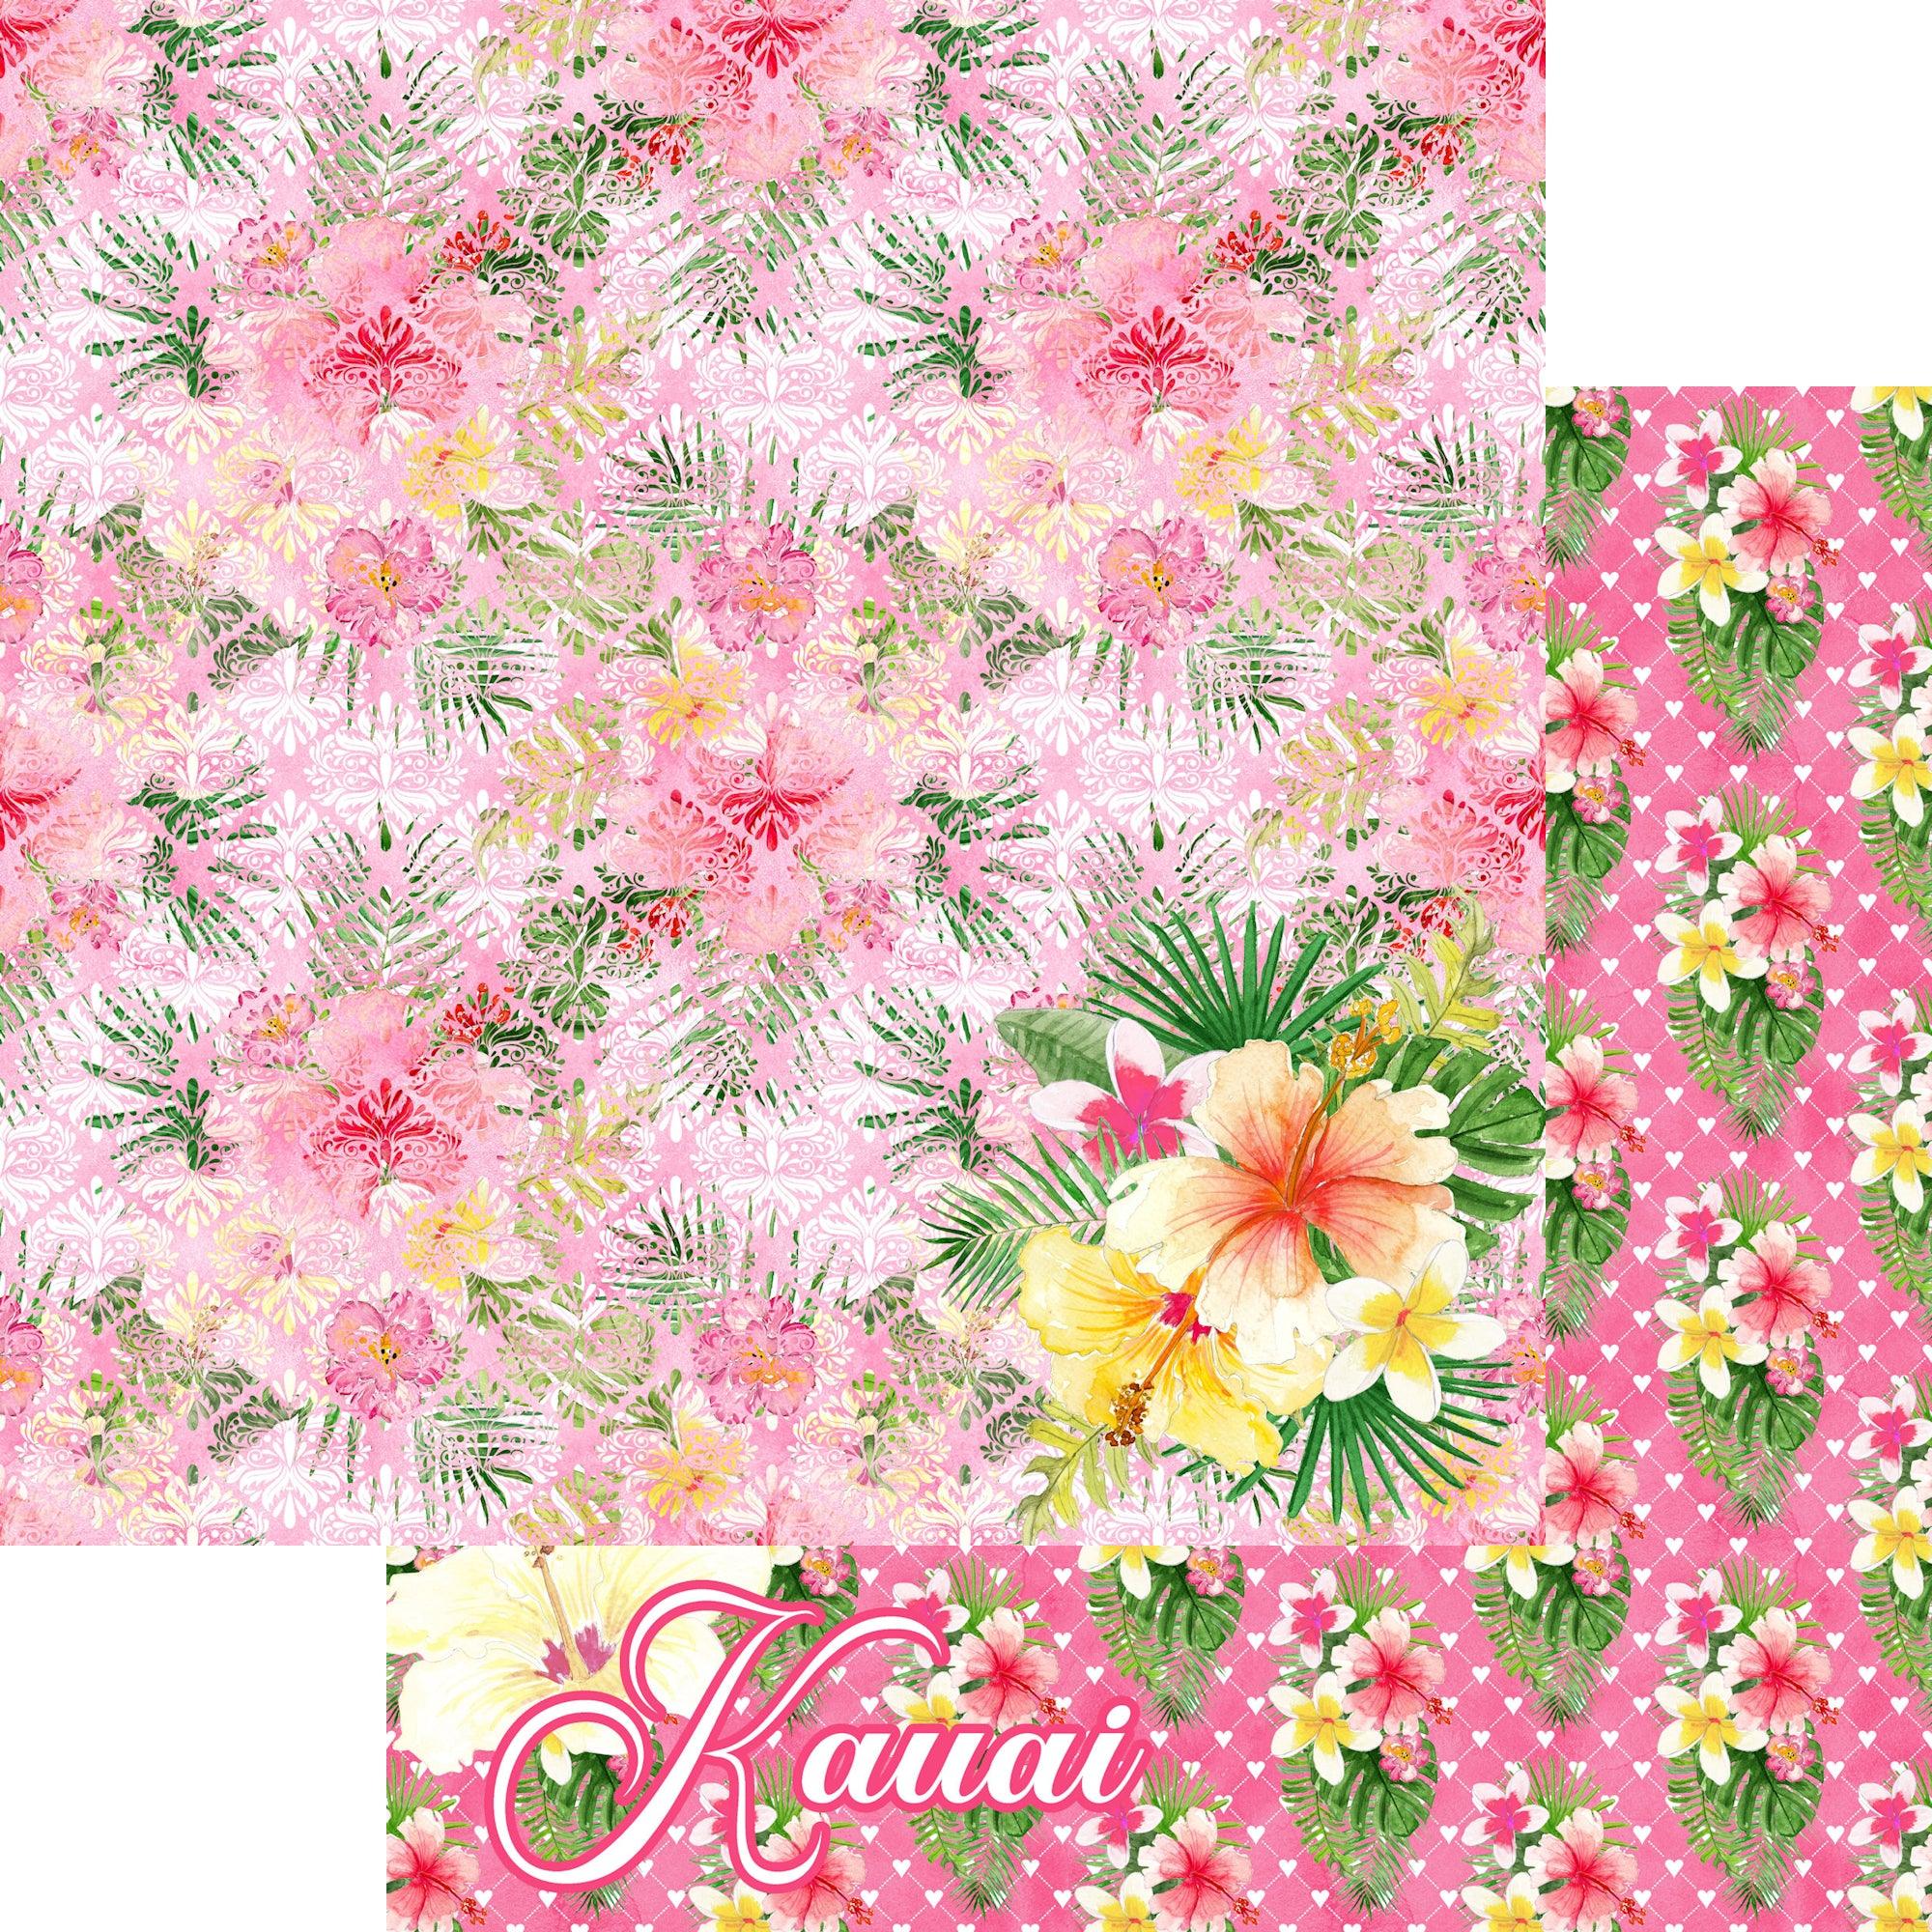 Aloha, Hawaii Collection Kauai 12 x 12 Double-Sided Scrapbook Paper by SSC Designs - Scrapbook Supply Companies